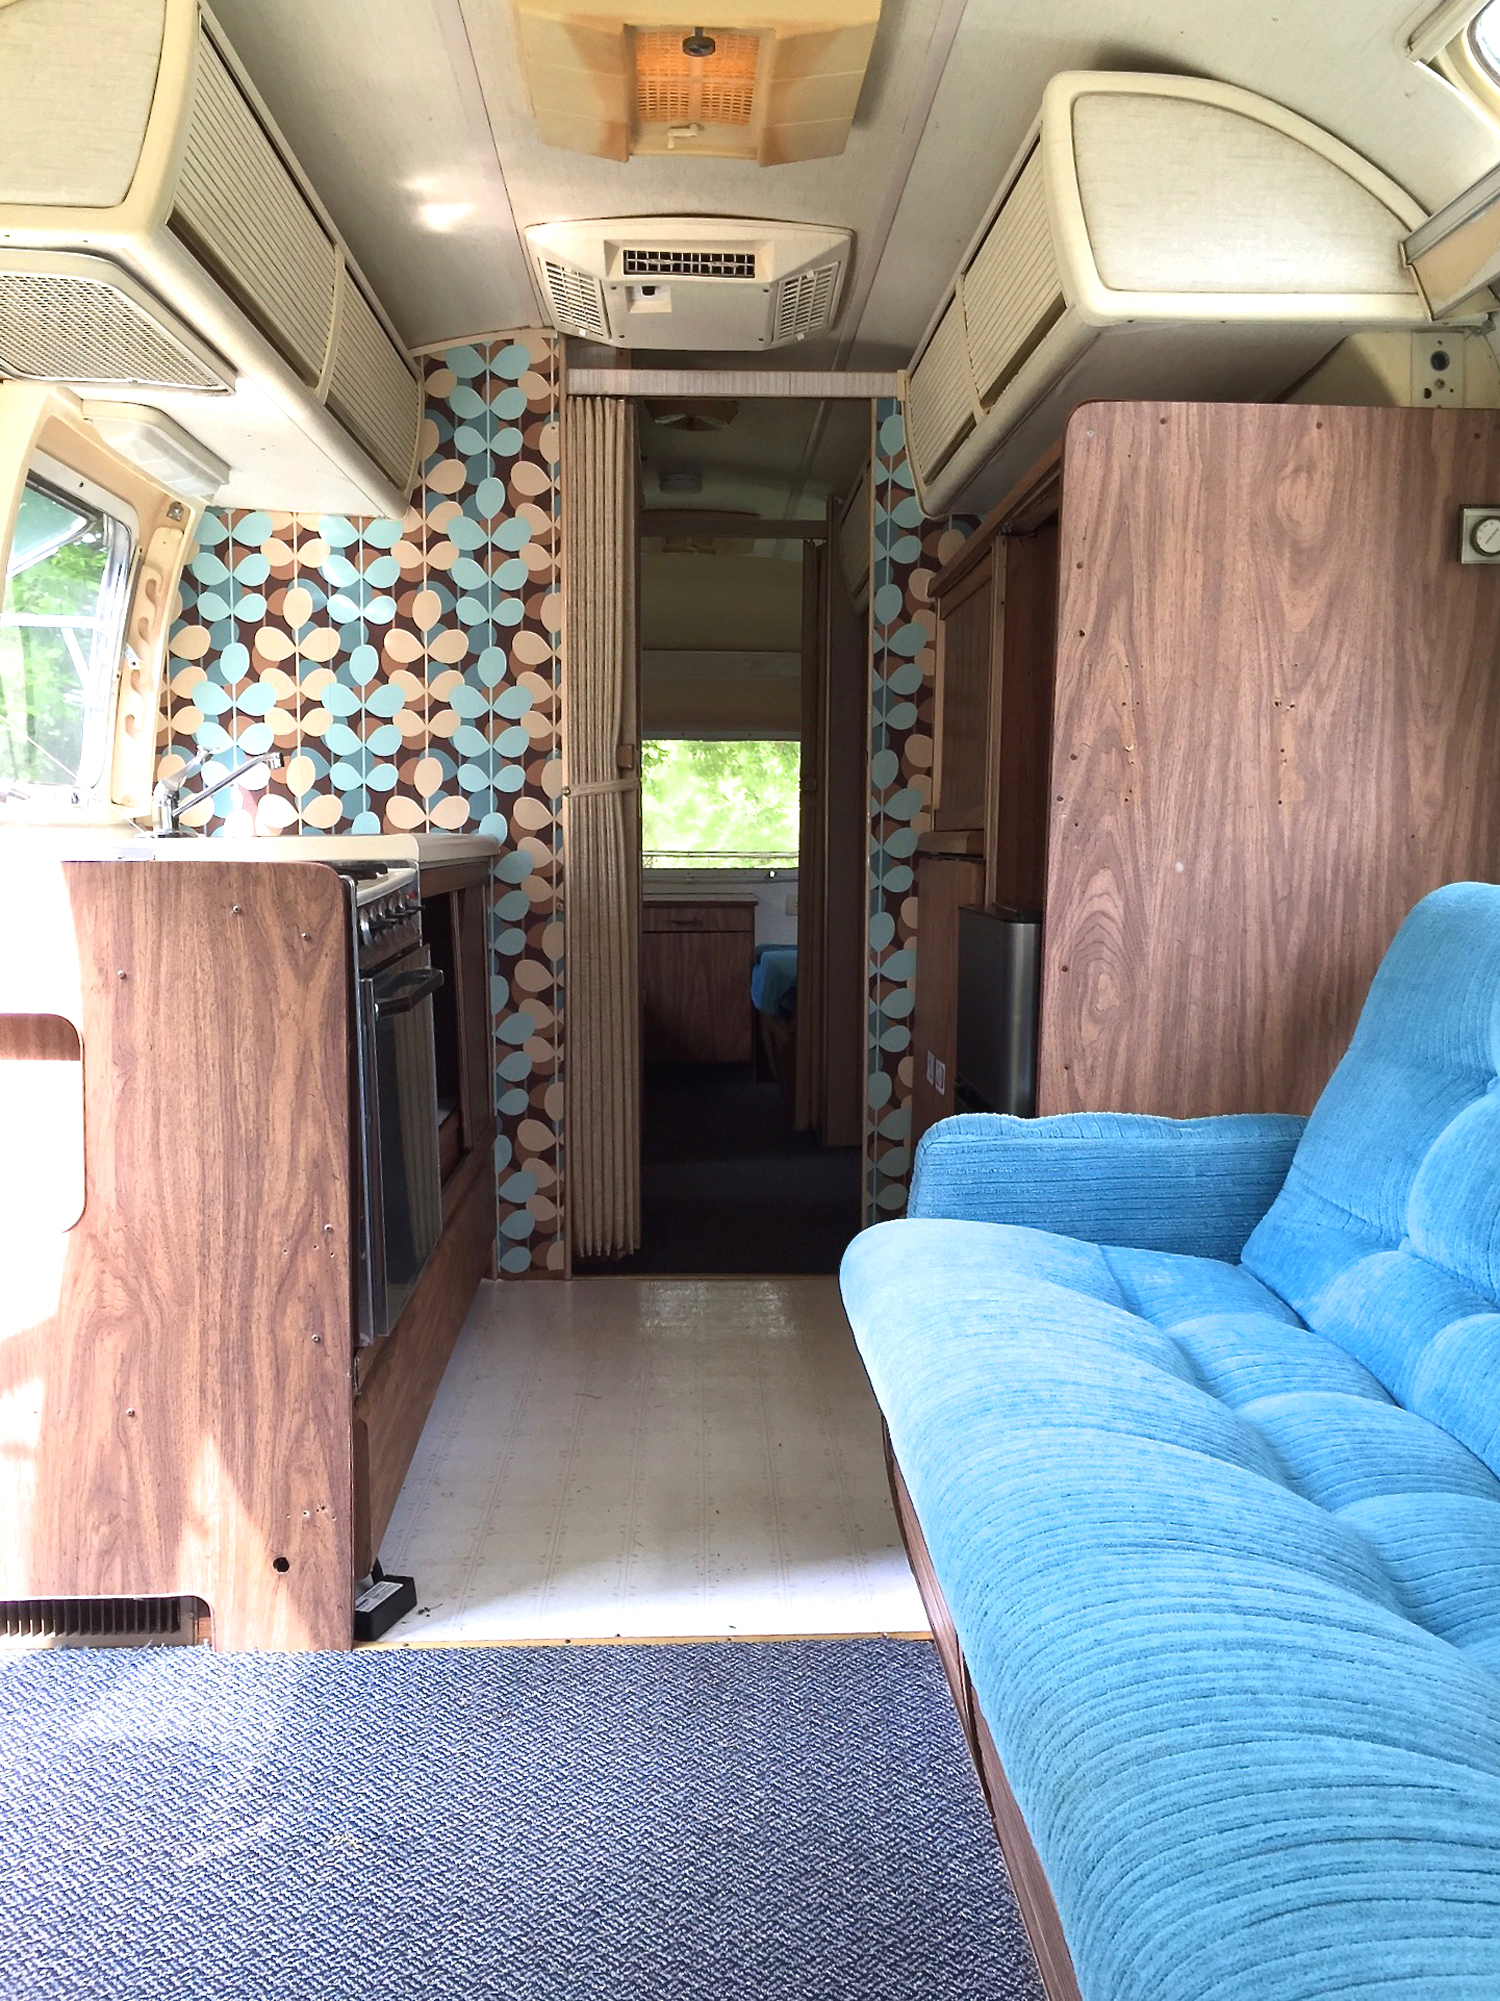 Check out the restoration of the 1976 vintage airstream with before and after photos. A real stunner!